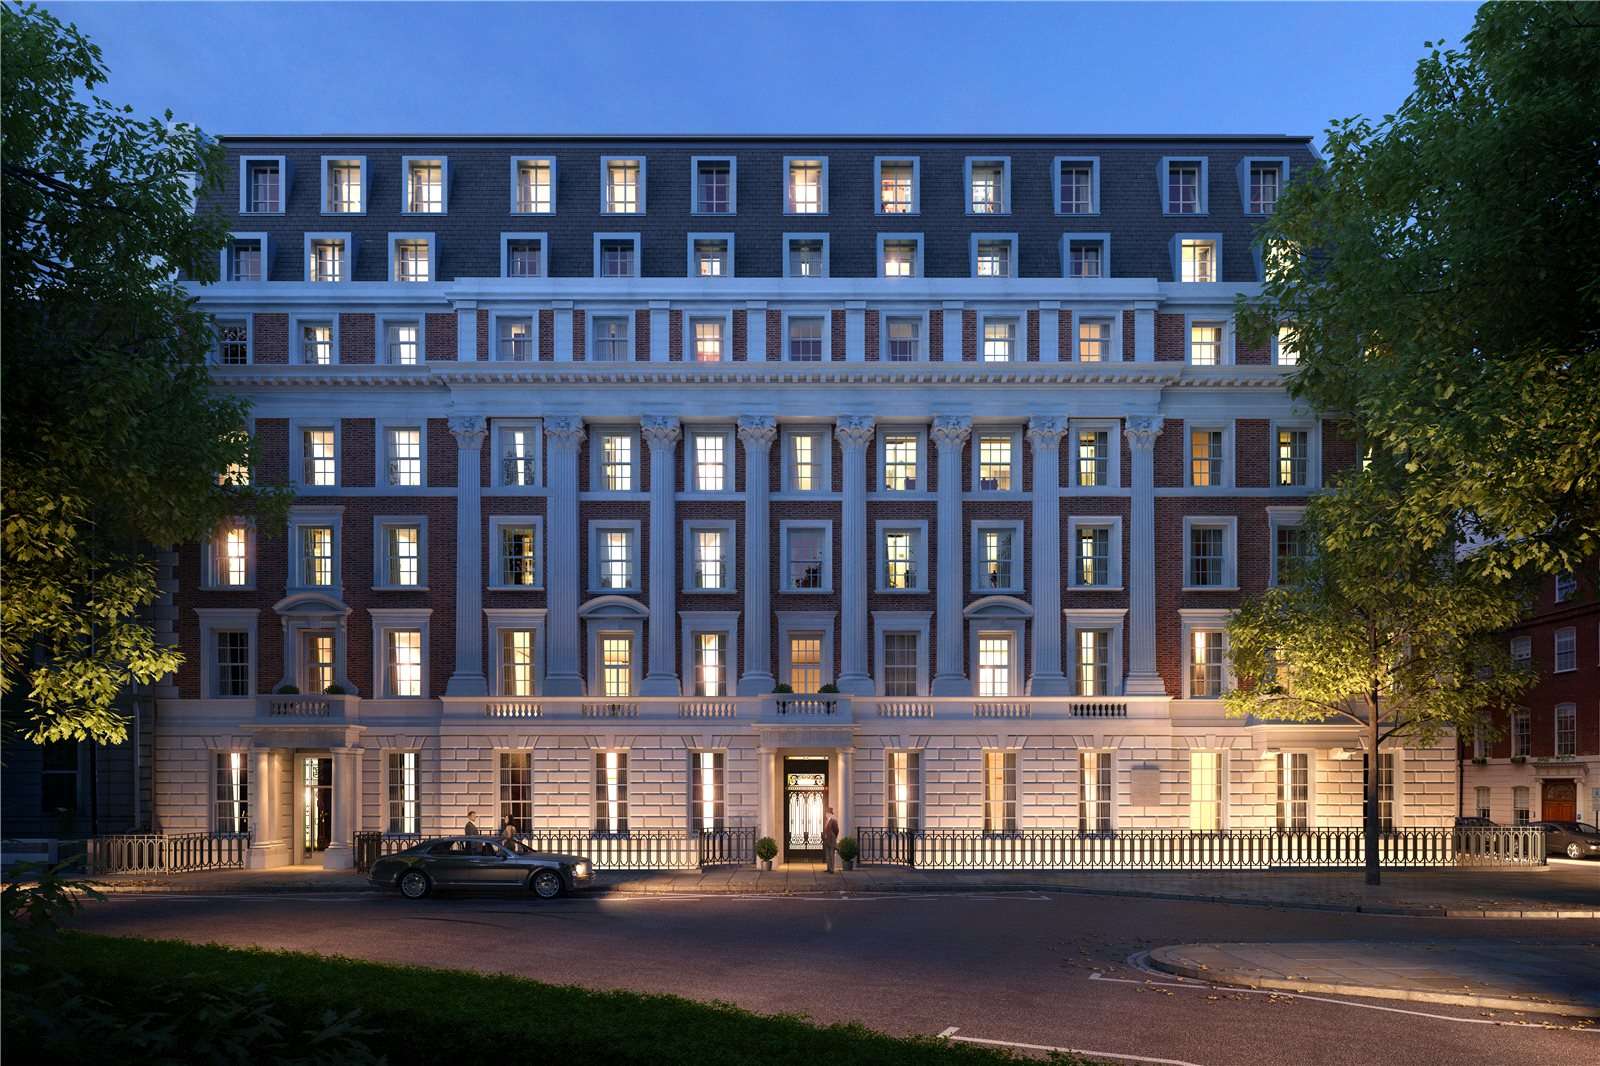 No. 1 Grosvenor Square Penthouse Sells For $252 Million